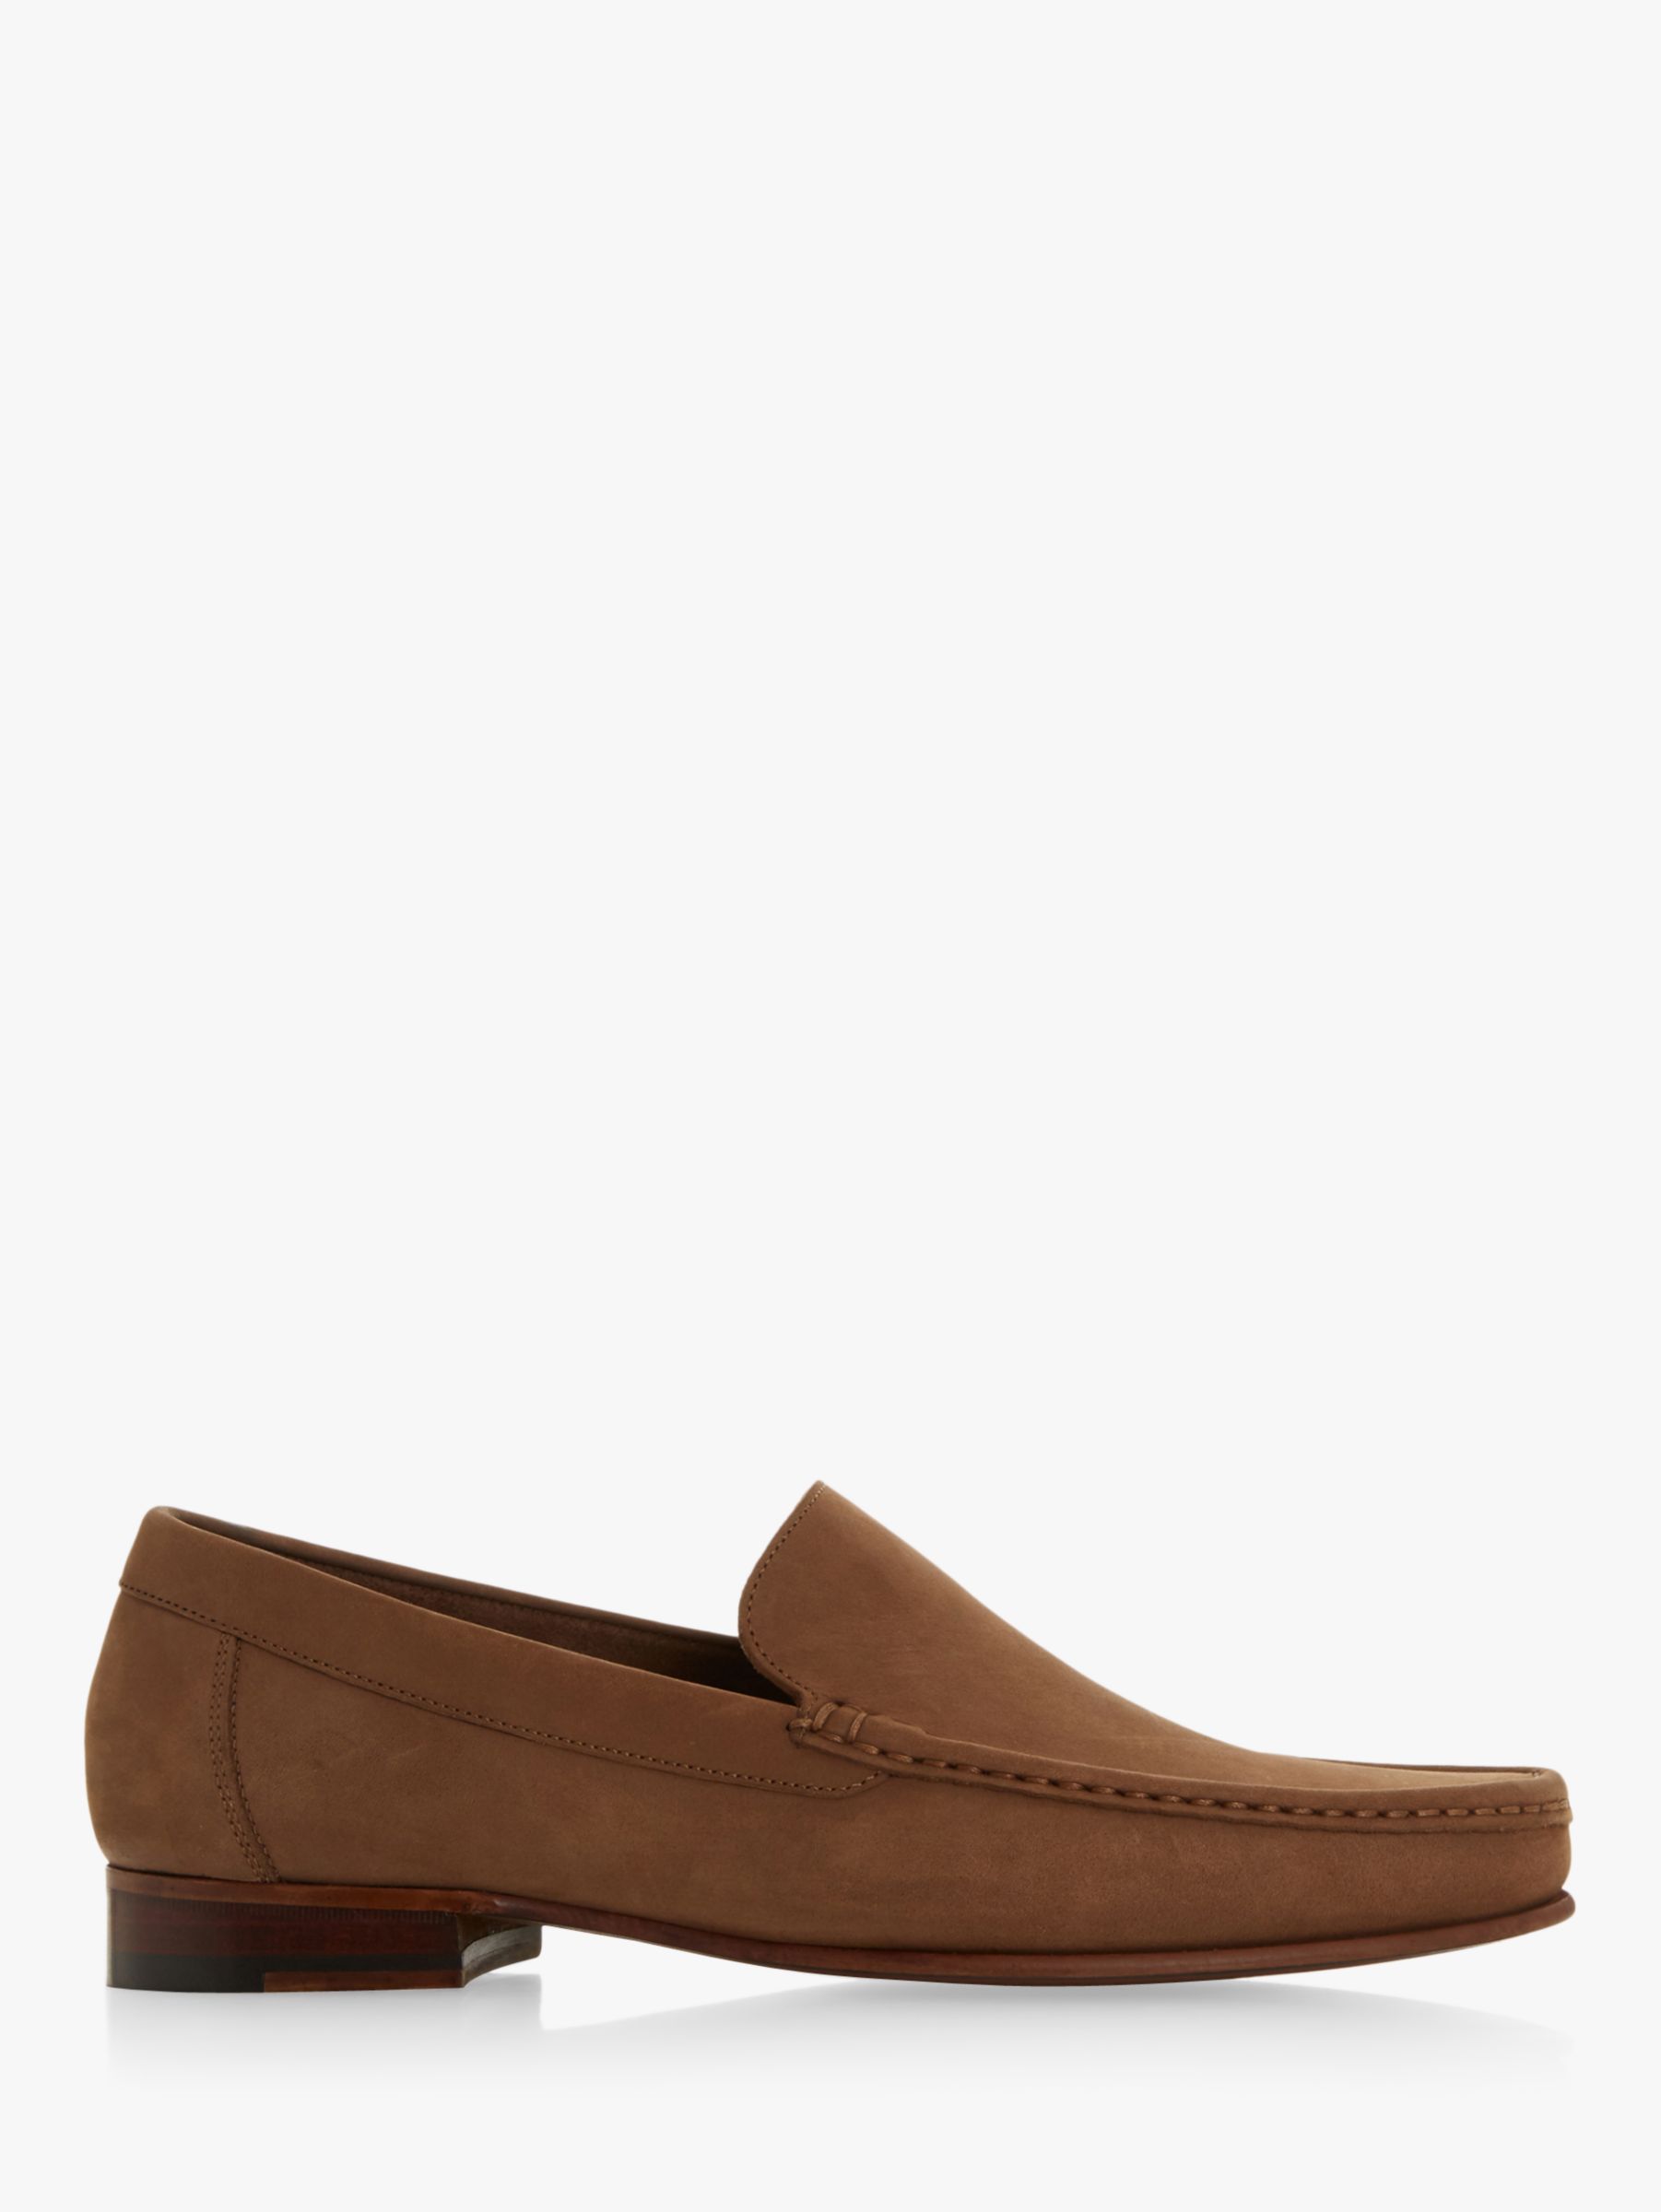 Dune Sloane Square Suede Loafers